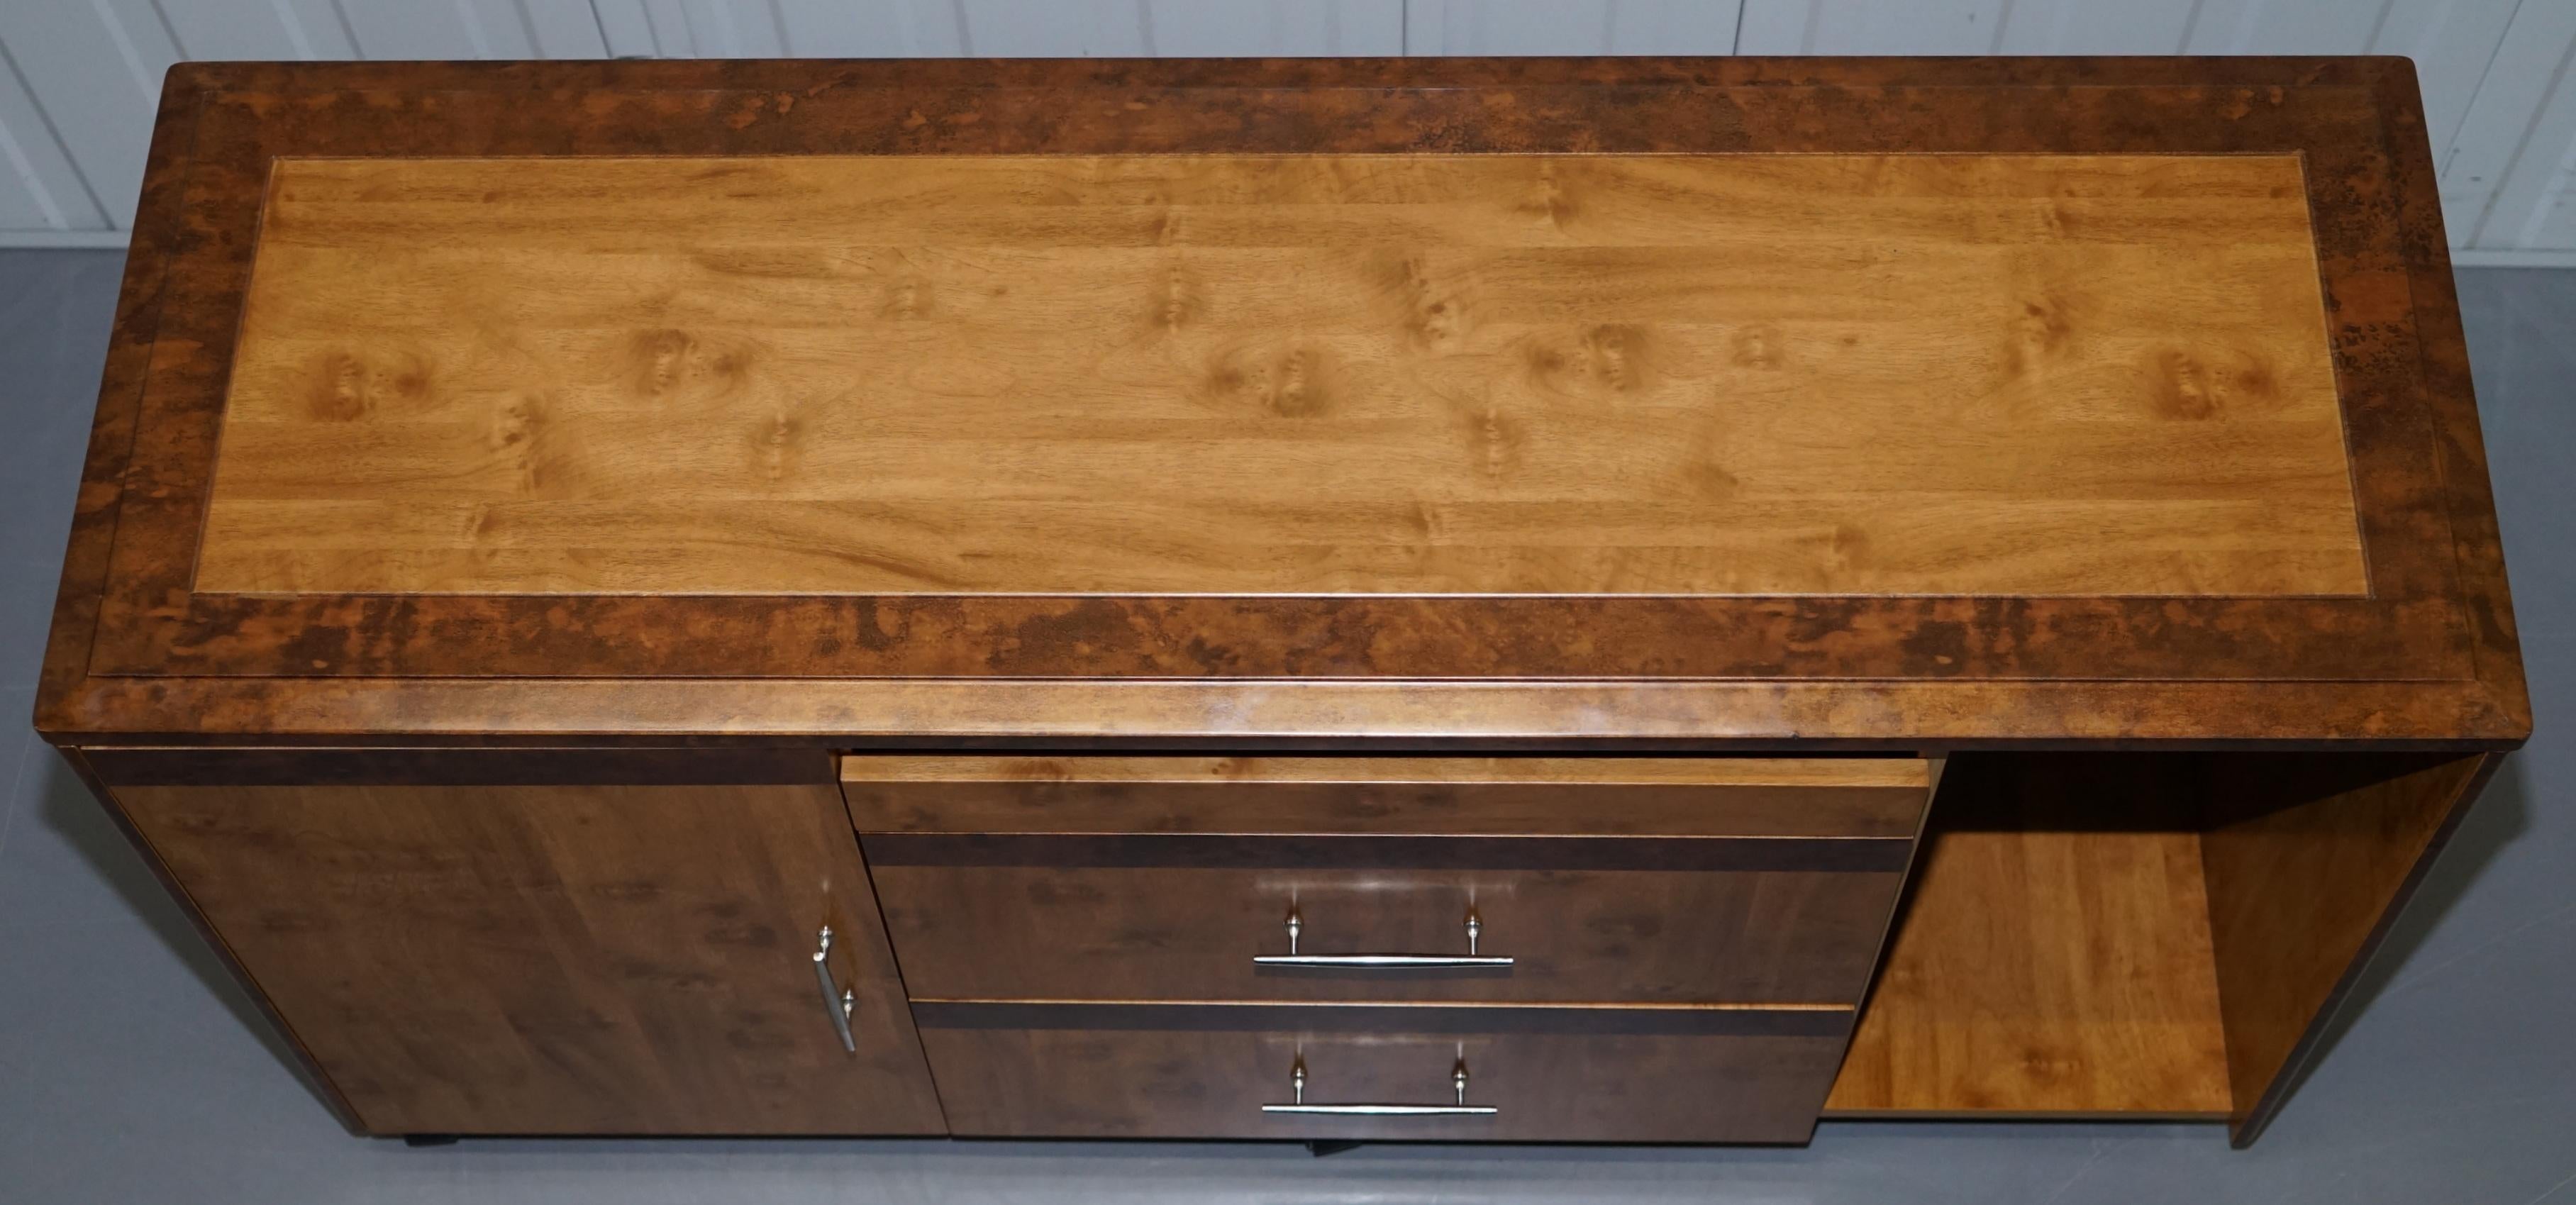 Modern Burr Walnut Sideboard TV Stand Drawers Designed to House Computer Part of Suite For Sale